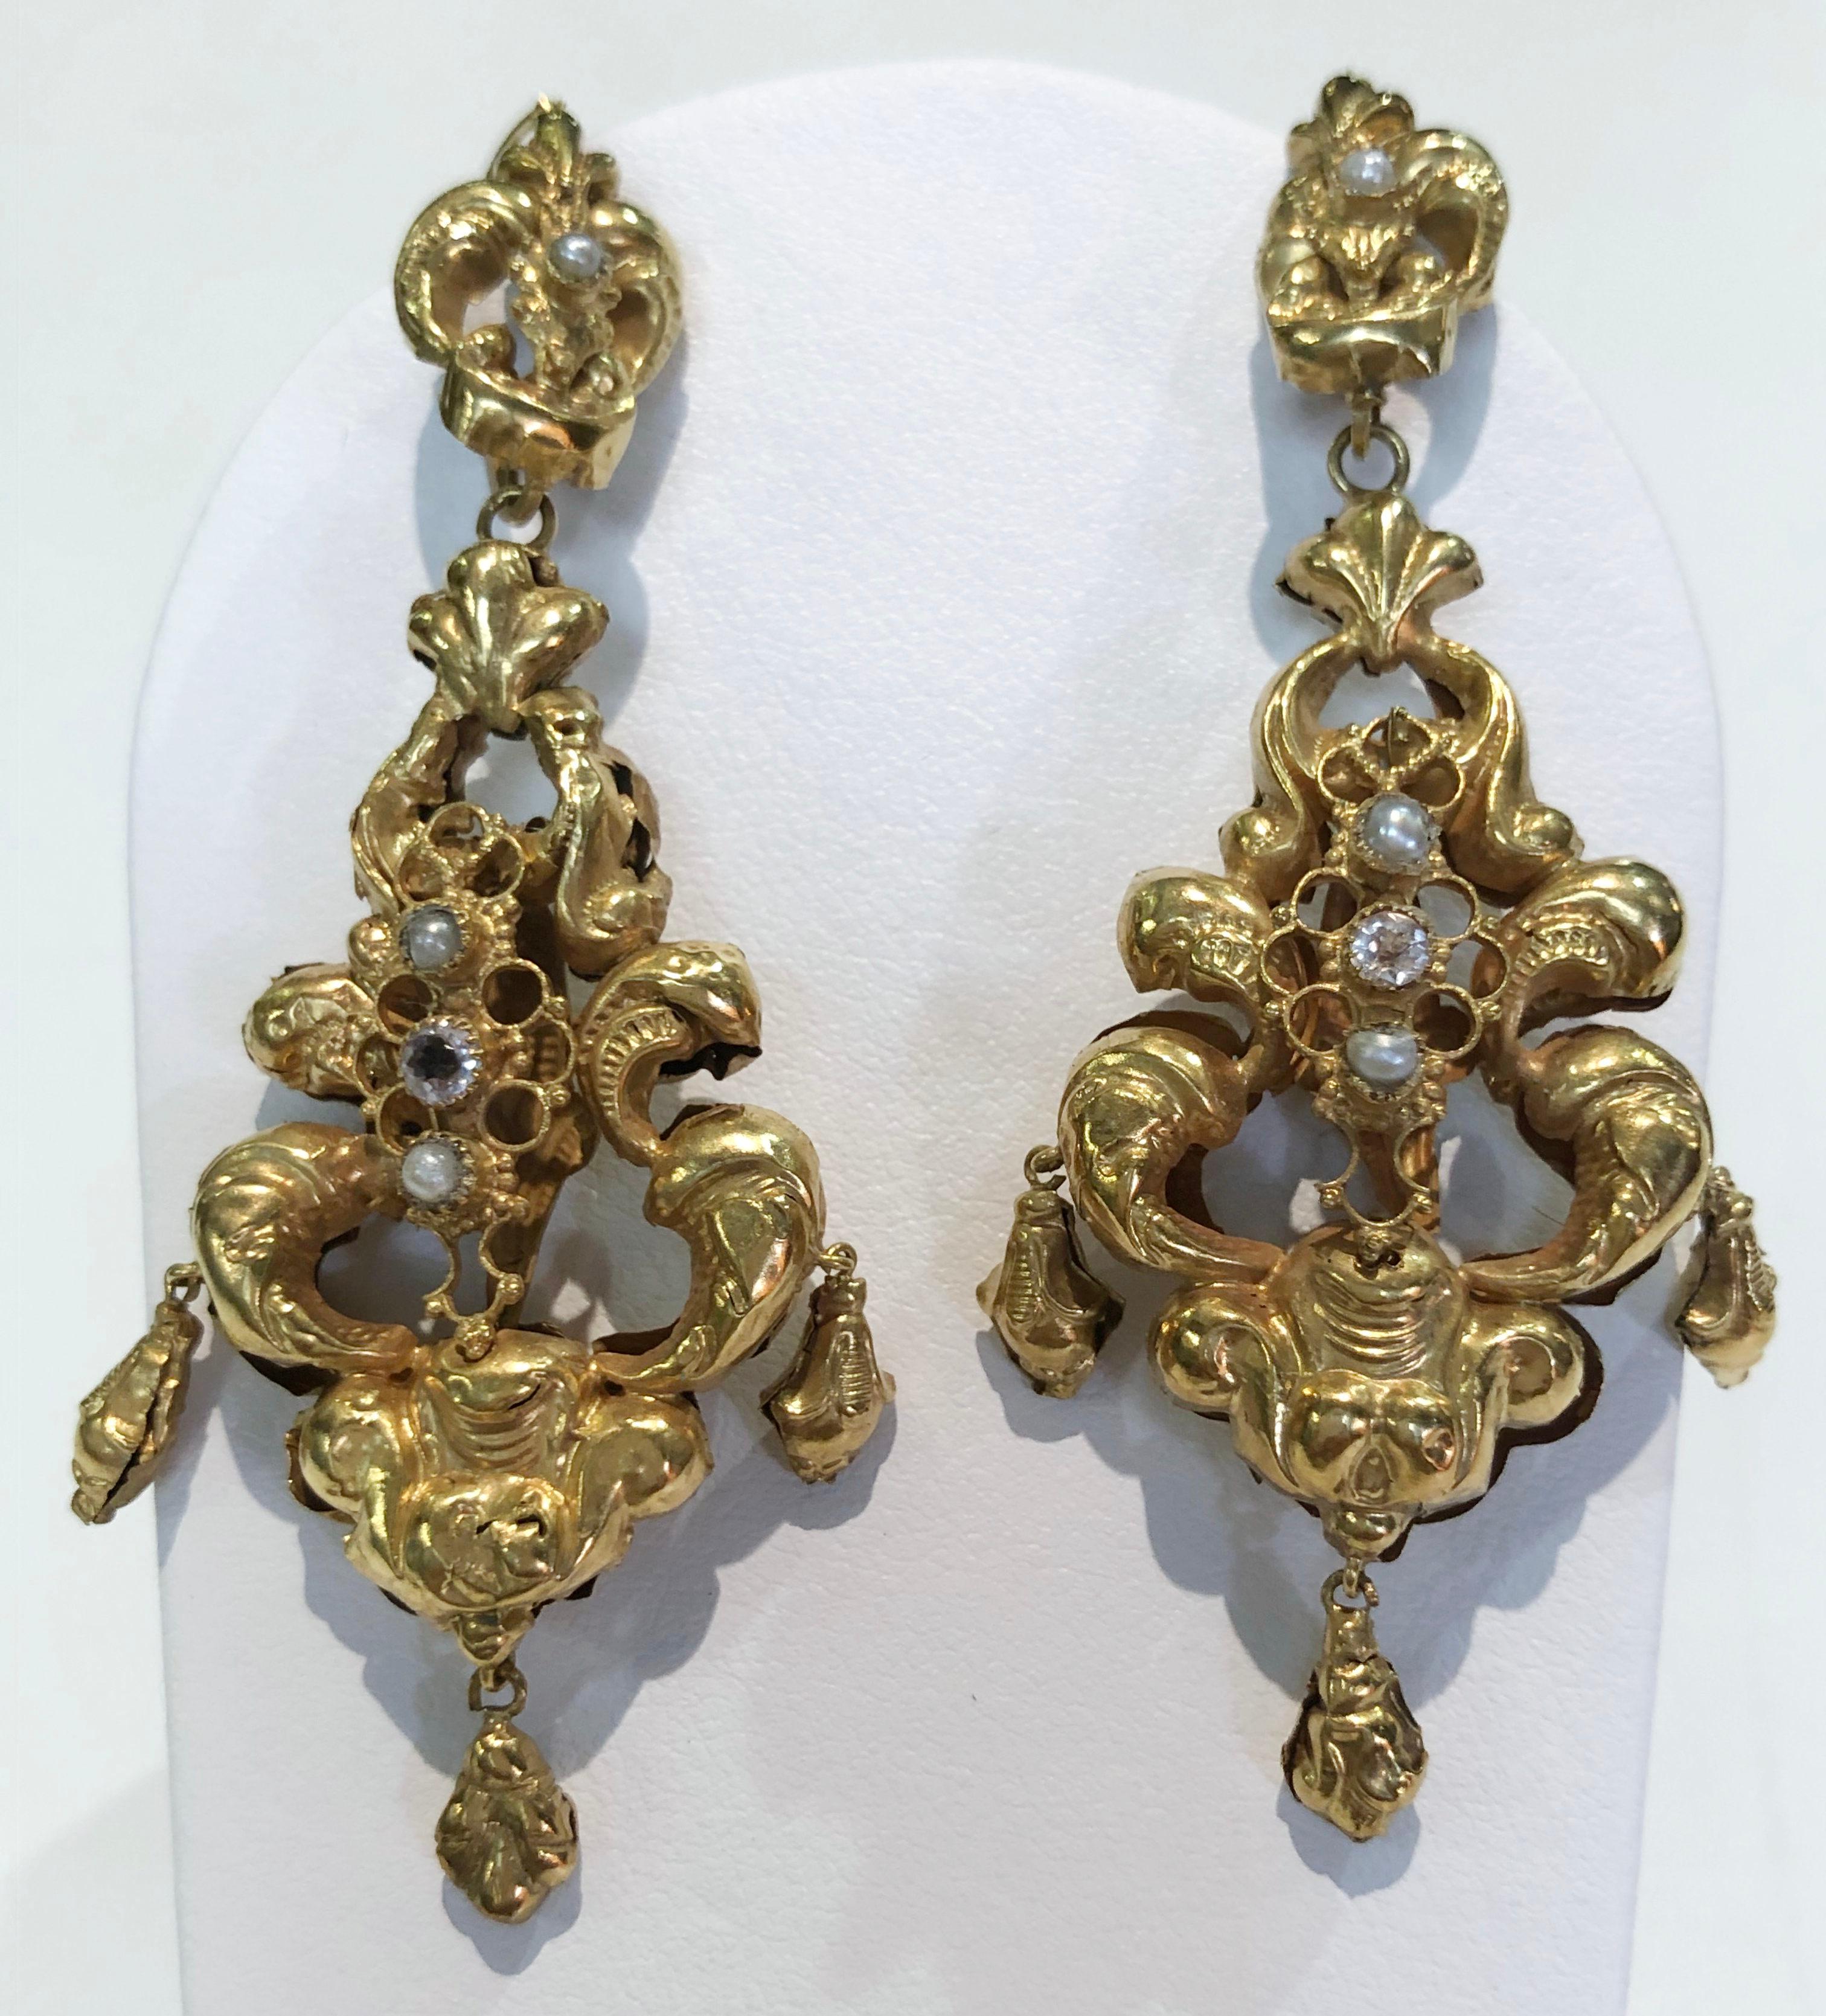 Pair of antique hand-embossed gold earrings, Italy 1700s
Length 7.5cm